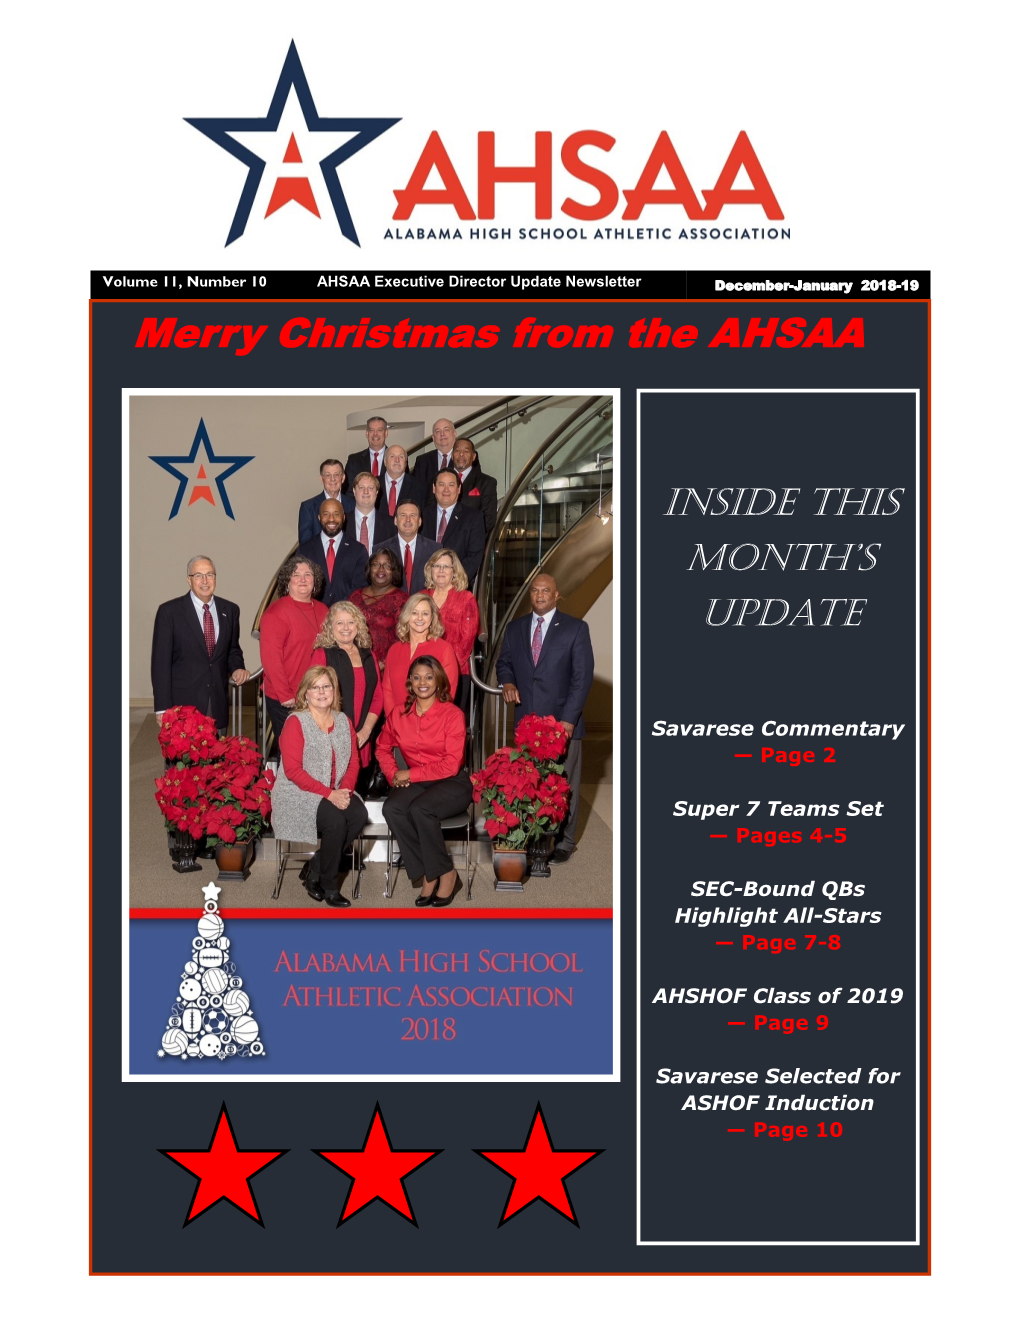 Merry Christmas from the AHSAA